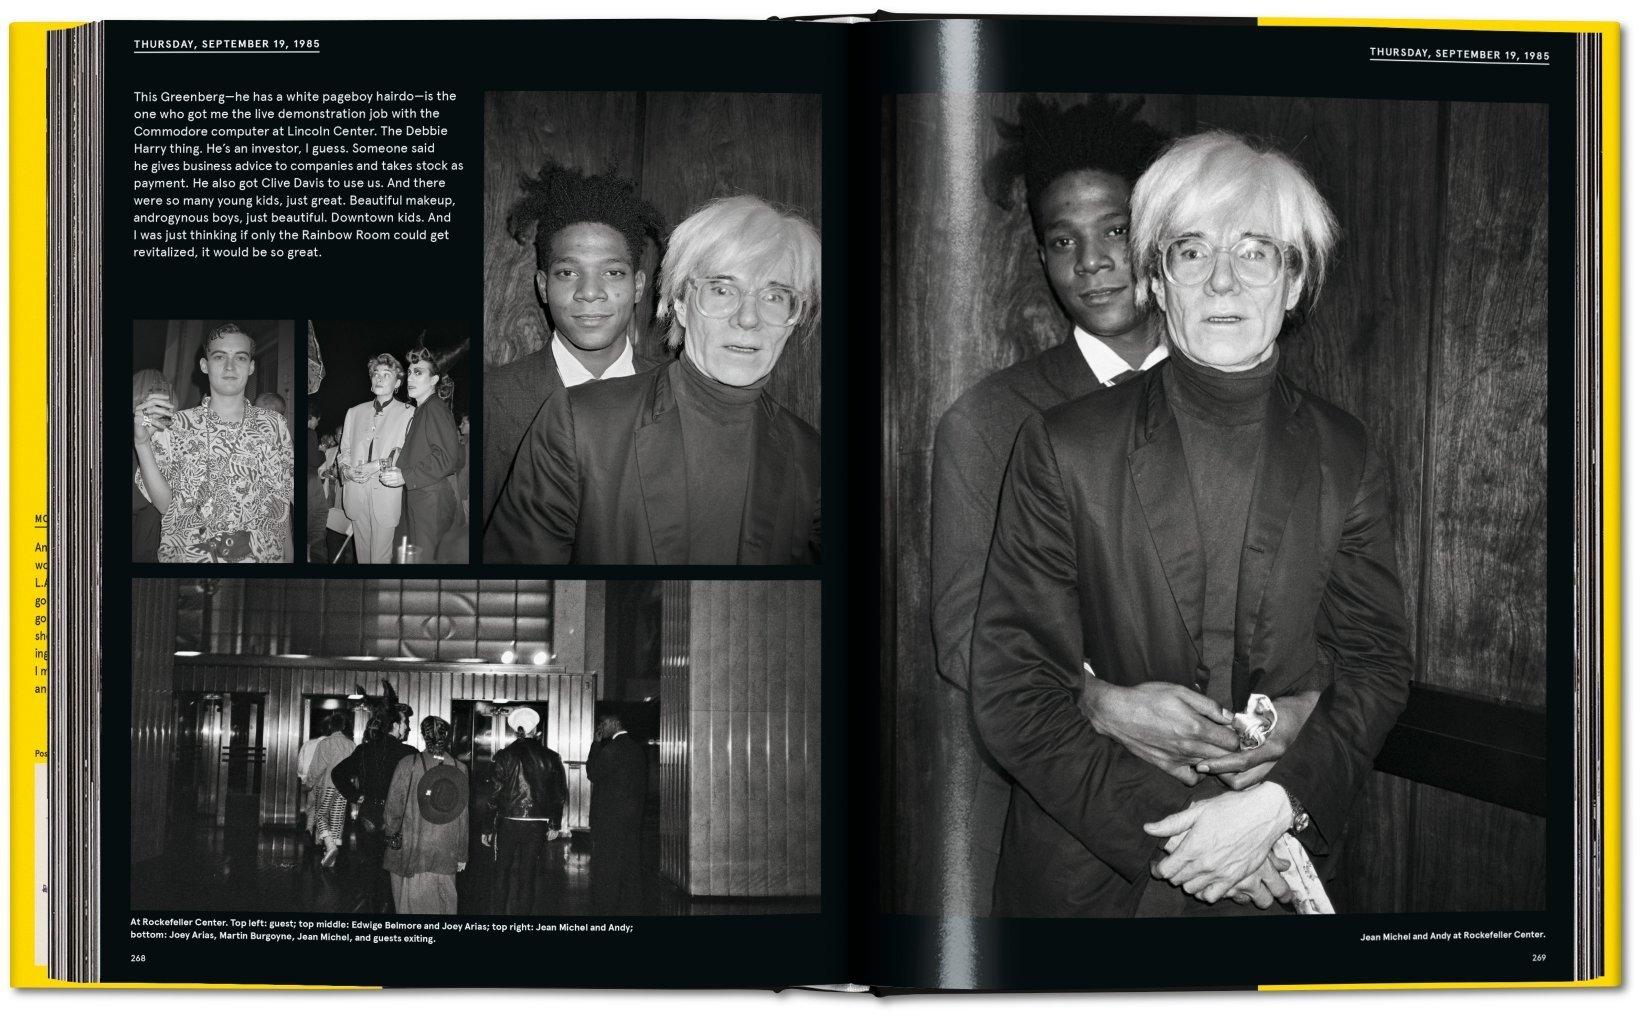 Andy Warhol and Jean-Michel Basquiat’s complex relationship captivated the art world then and now. At a time when Warhol was already world famous and the elder statesman of New York cool, Basquiat was a downtown talent rising rapidly from the